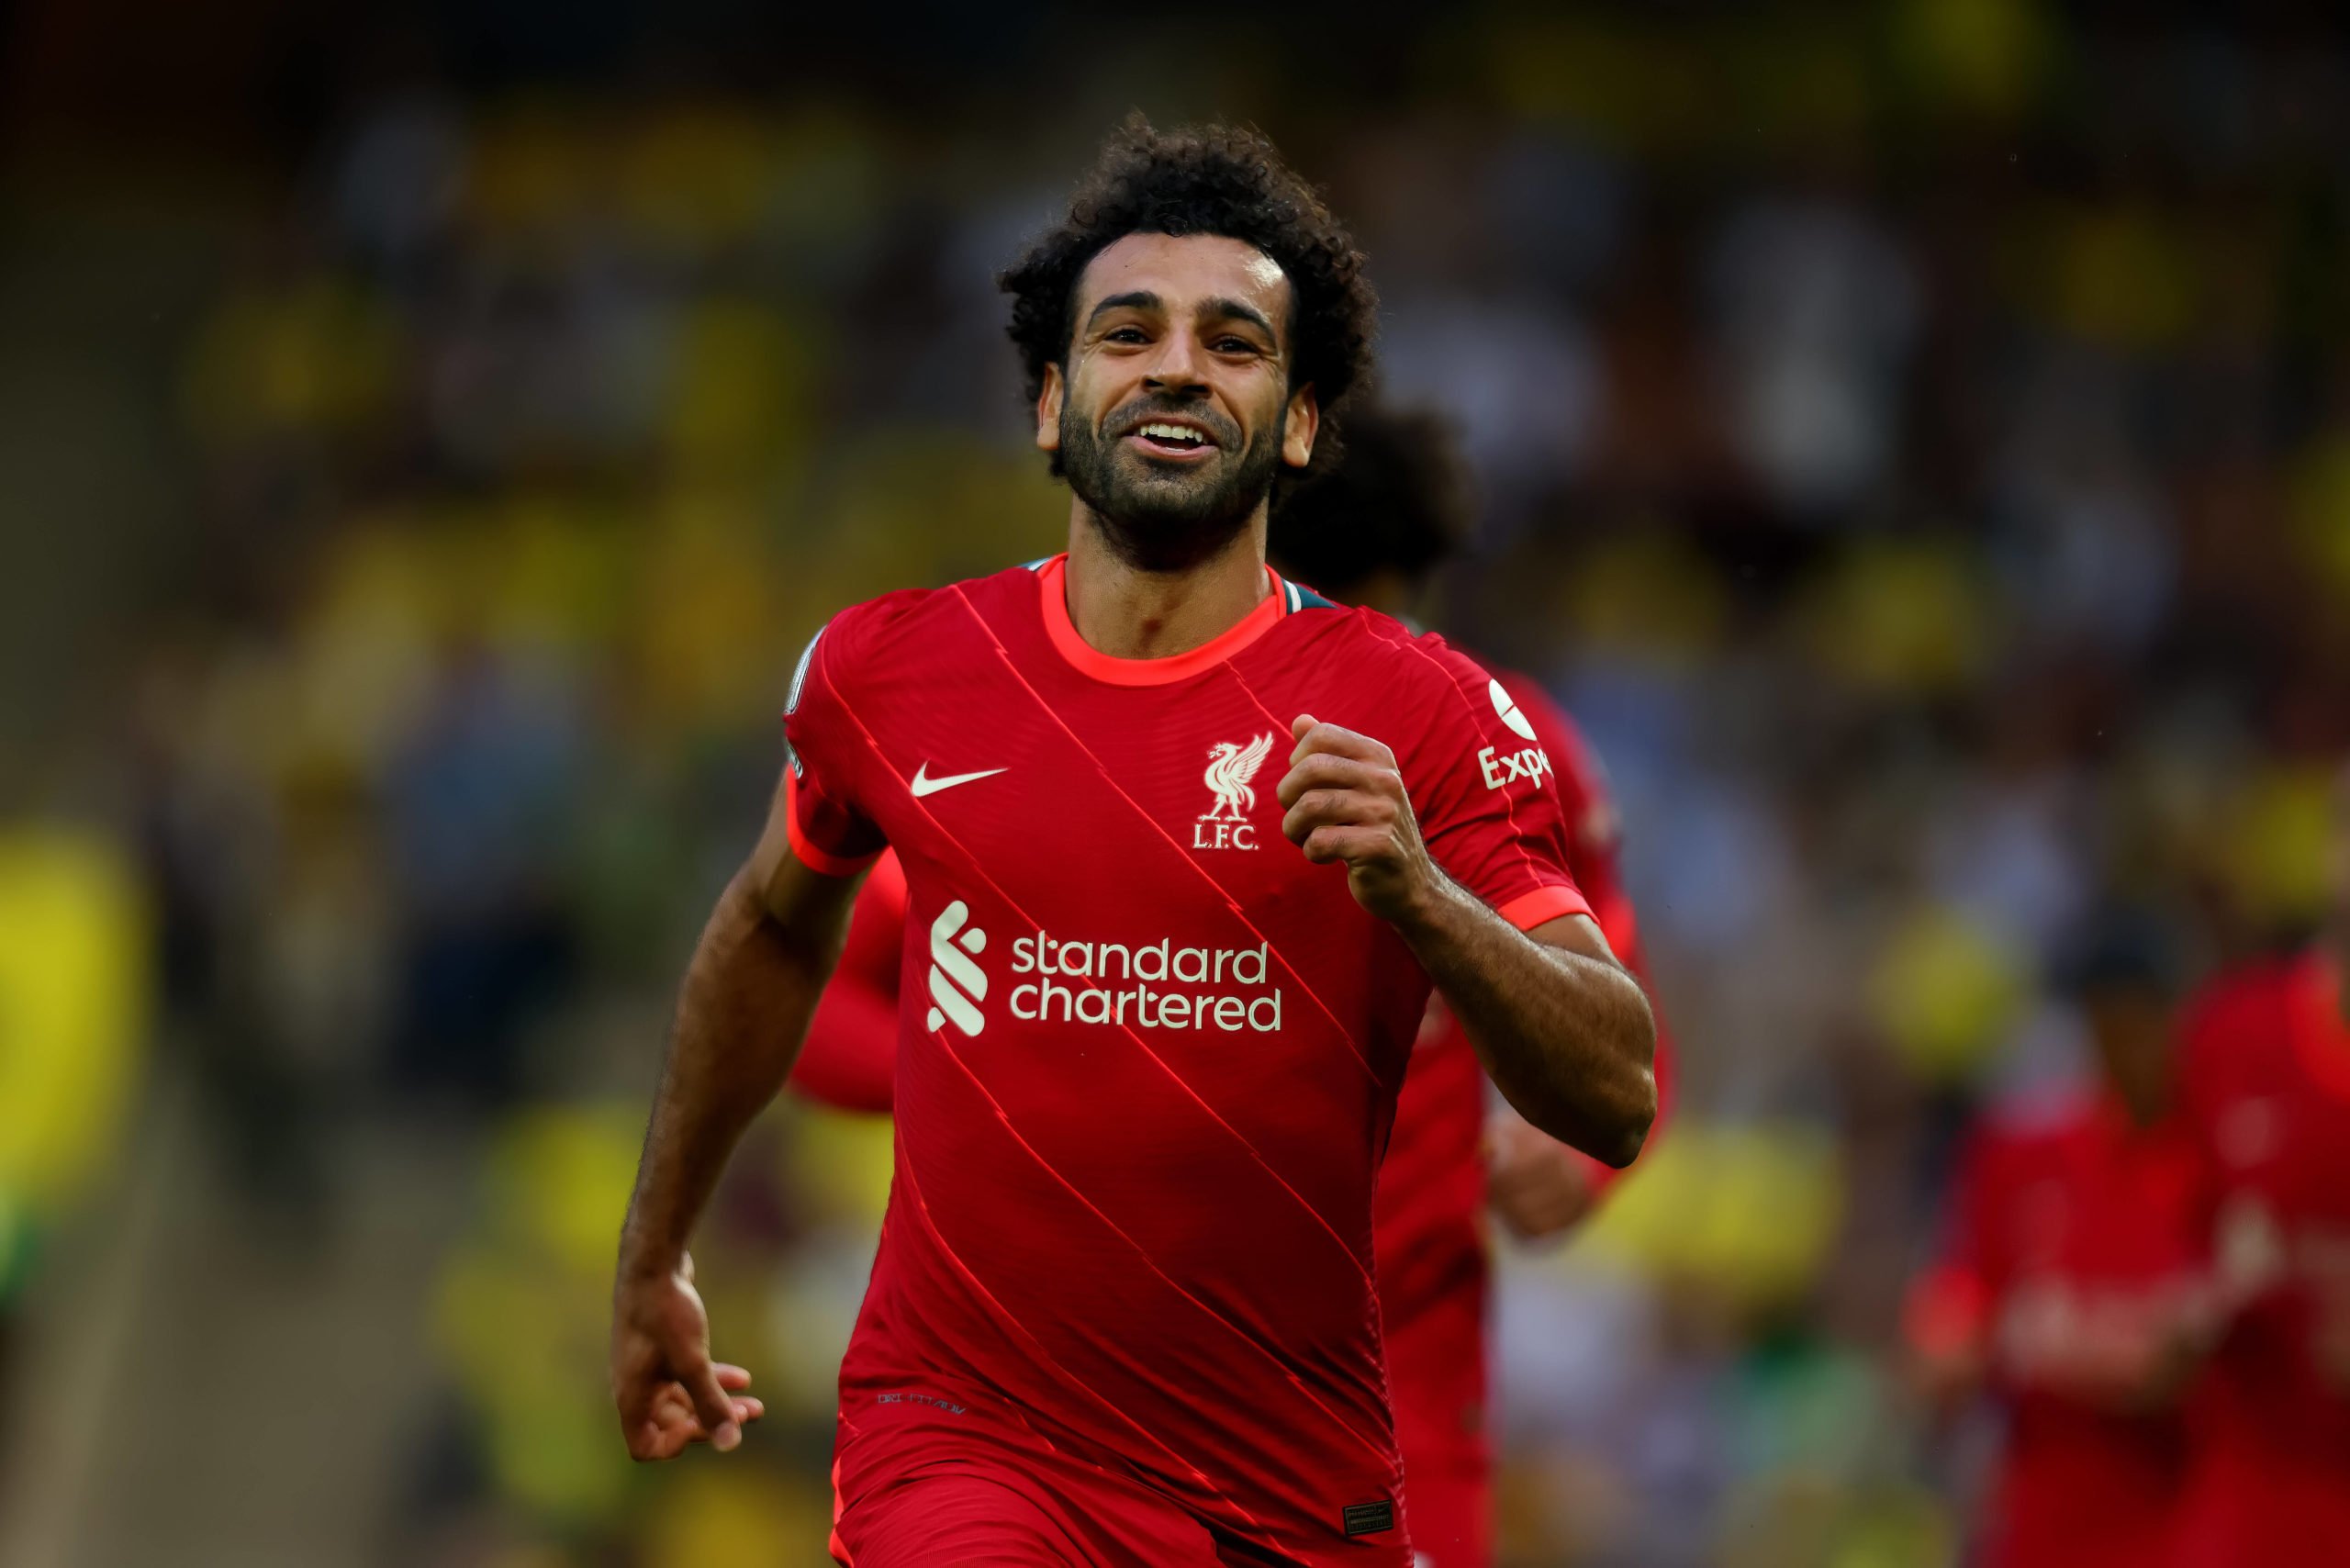 Update on Salah's future amid Real Madrid interest (Salah is seen in the picture)